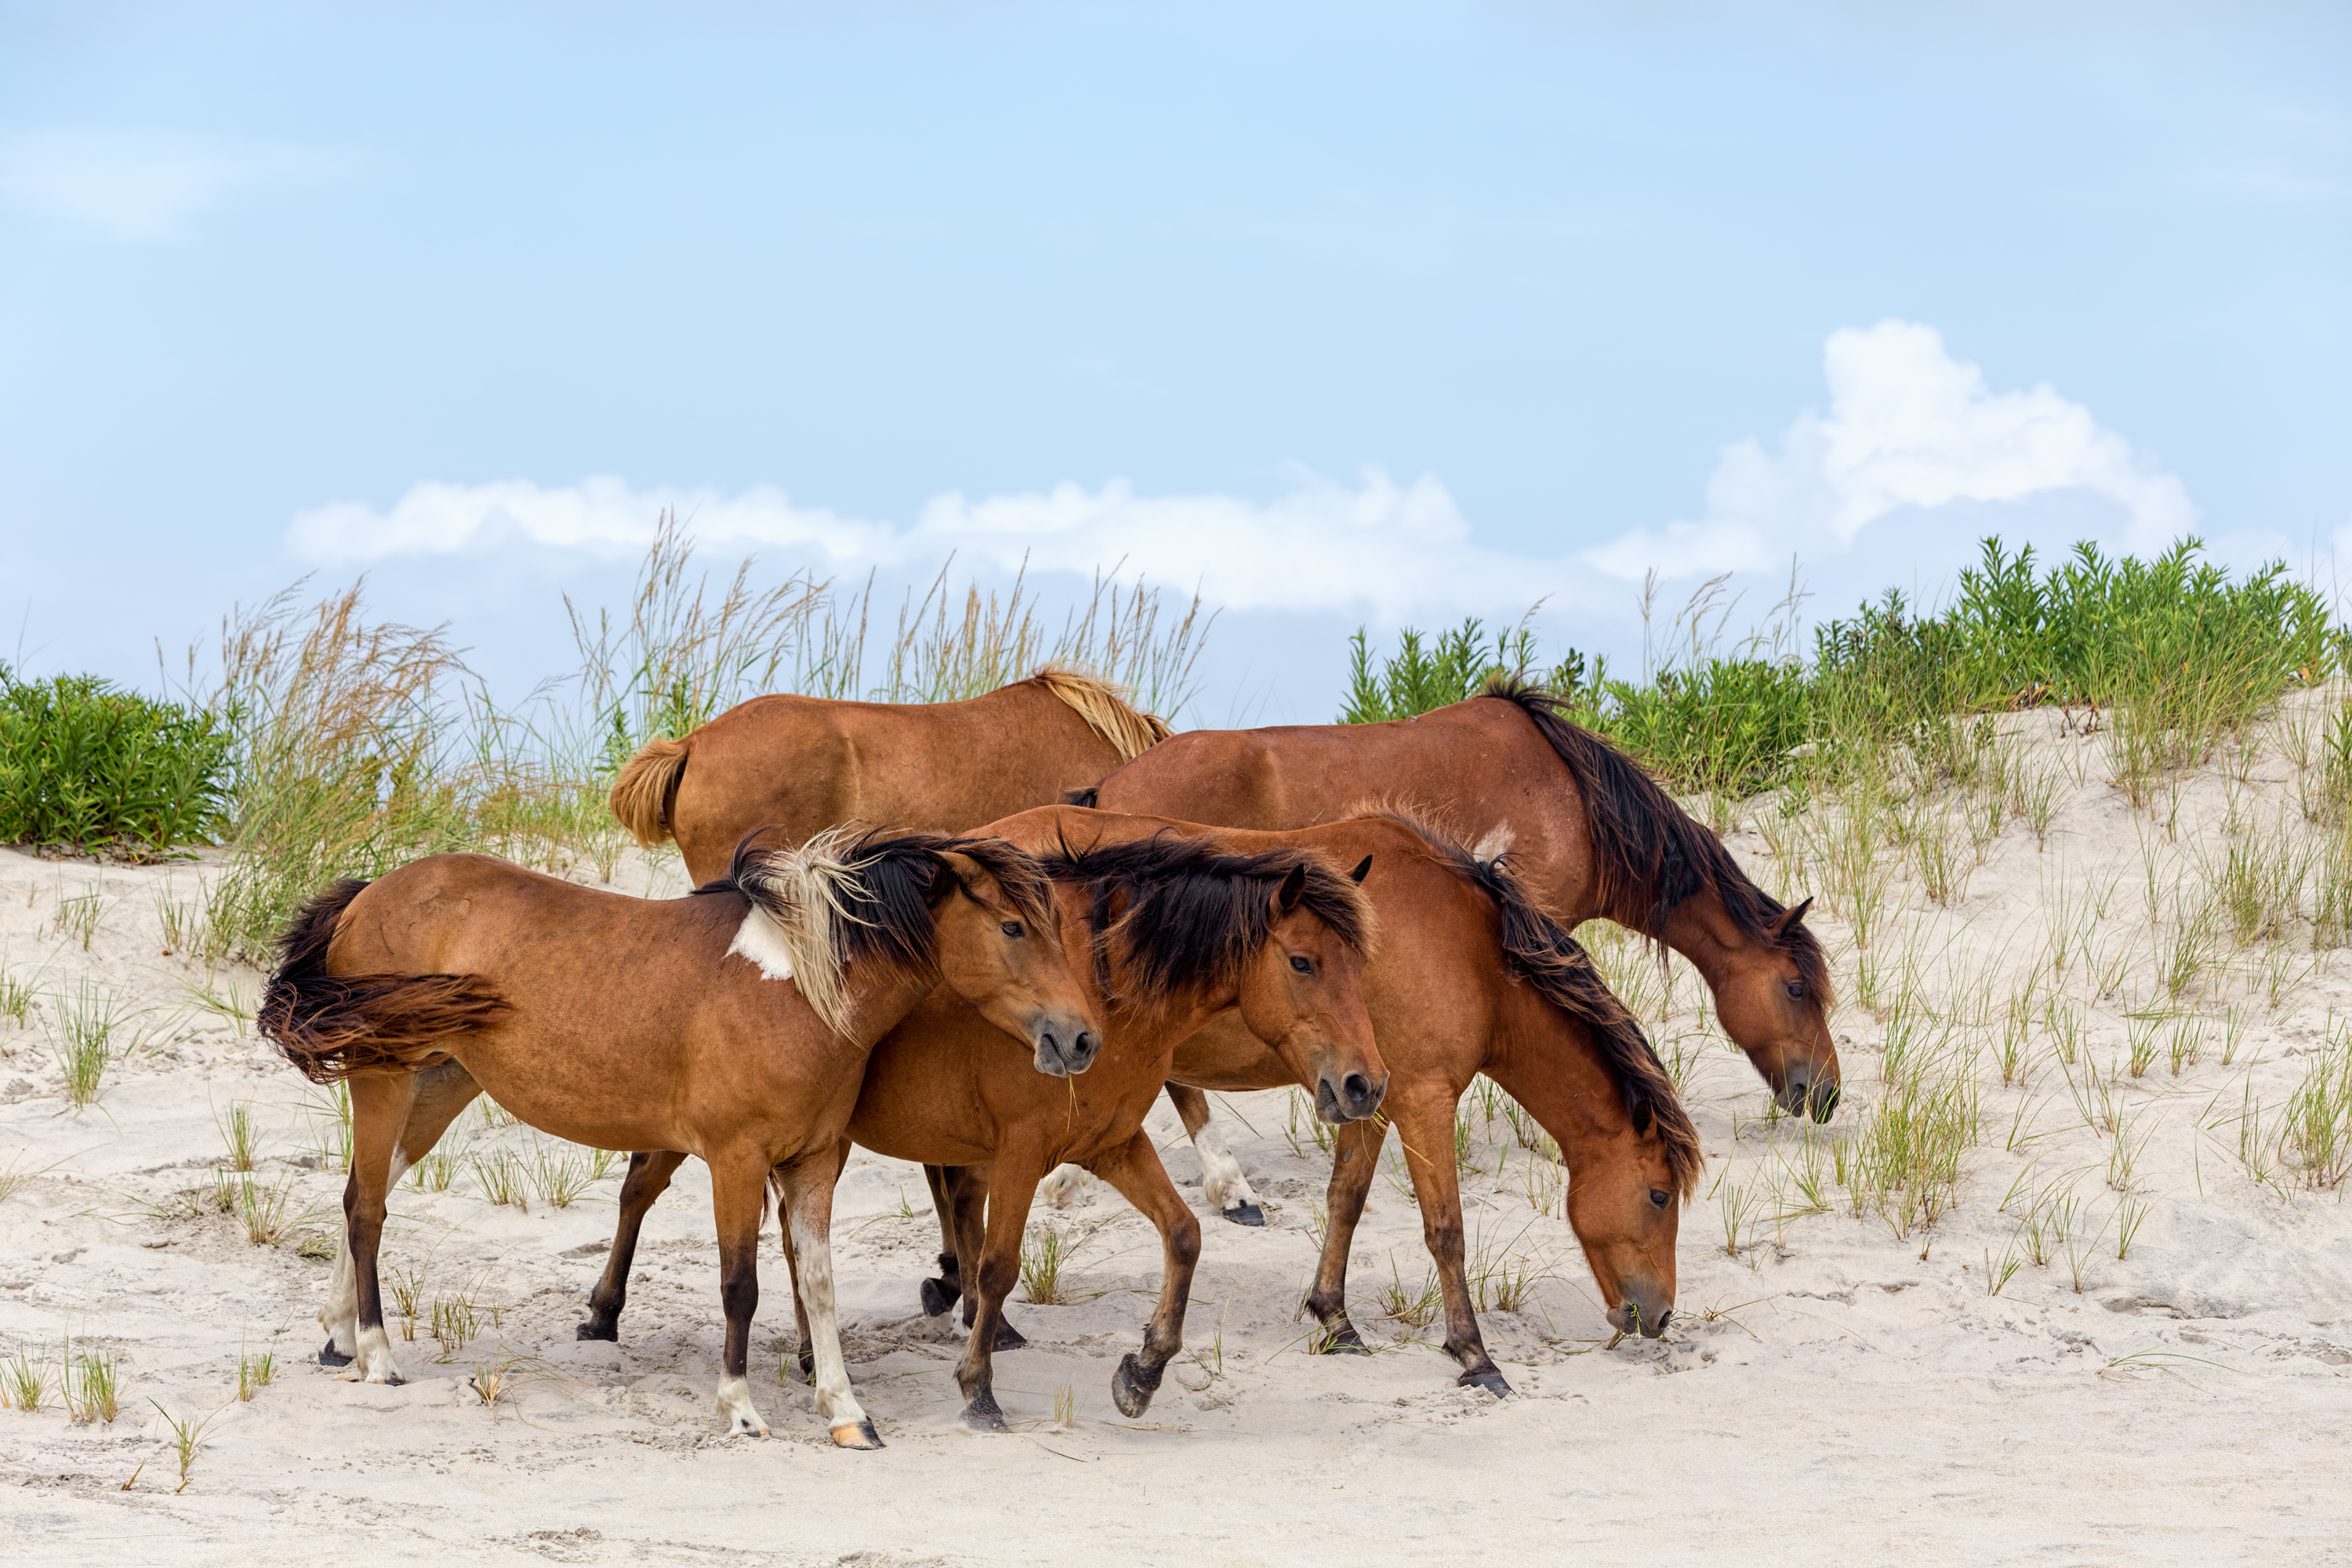 See the Ponies During a Family Vacation in Assateague Island - Wild Horses on Assateague Island